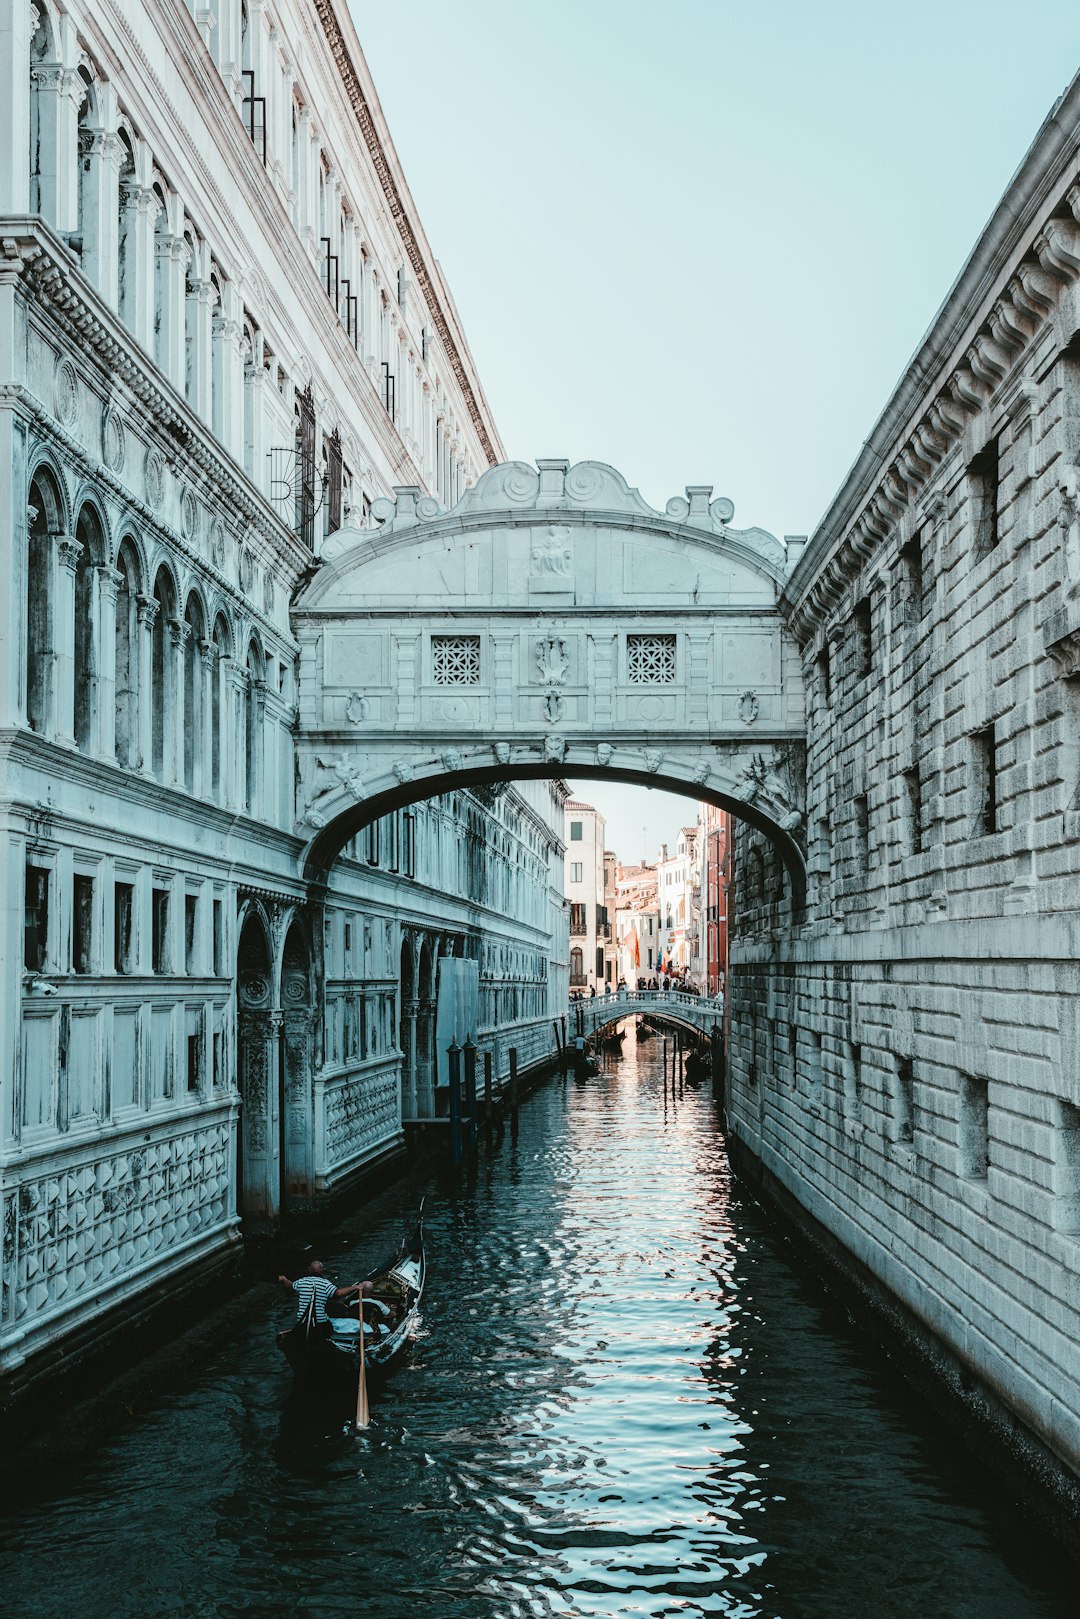 Travel Tips and Stories of Bridge of Sighs in Italy